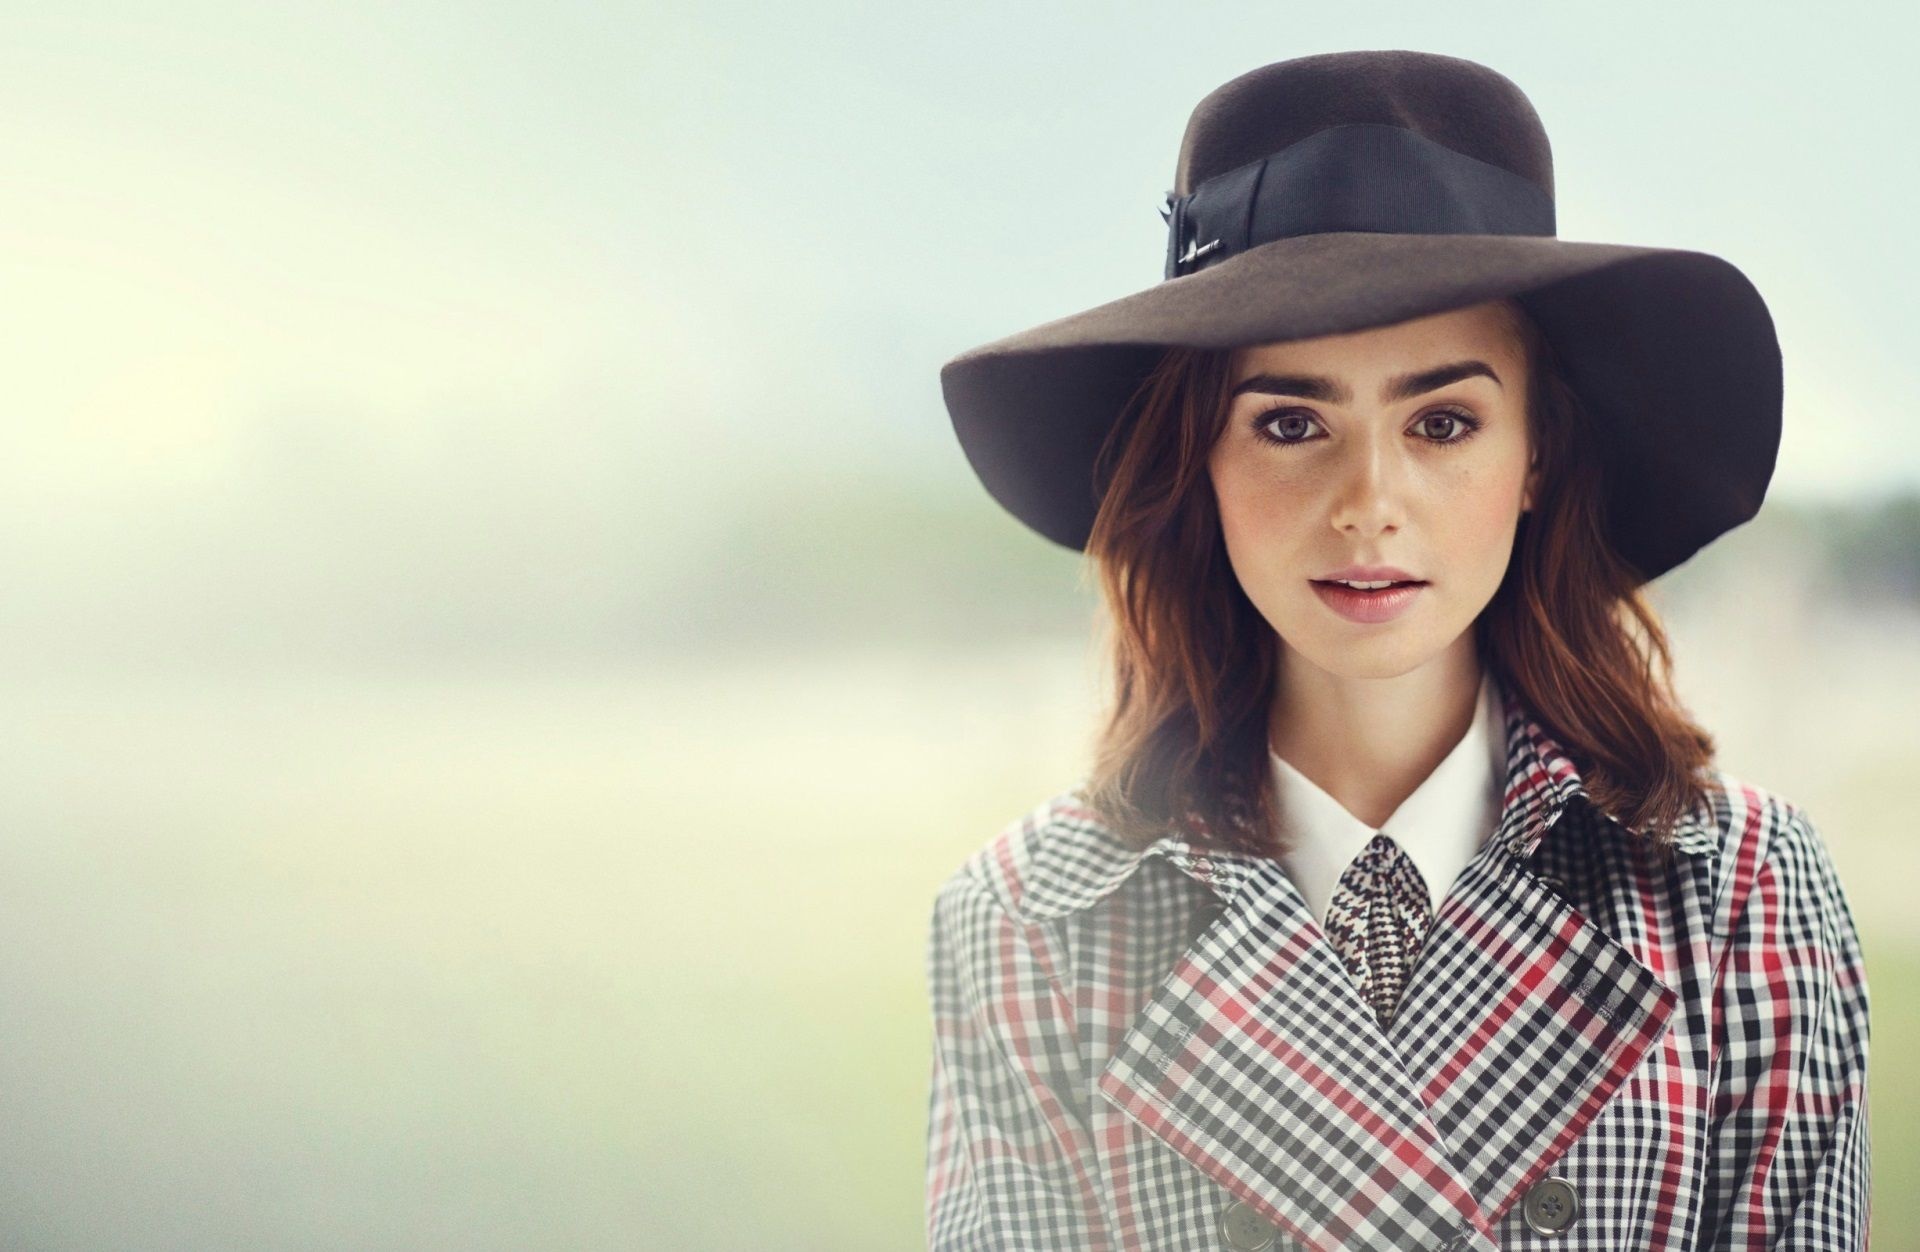 Lily Collins interesting wallpaper, HD resolution, Lily Collins allure, Captivating image, 1920x1260 HD Desktop